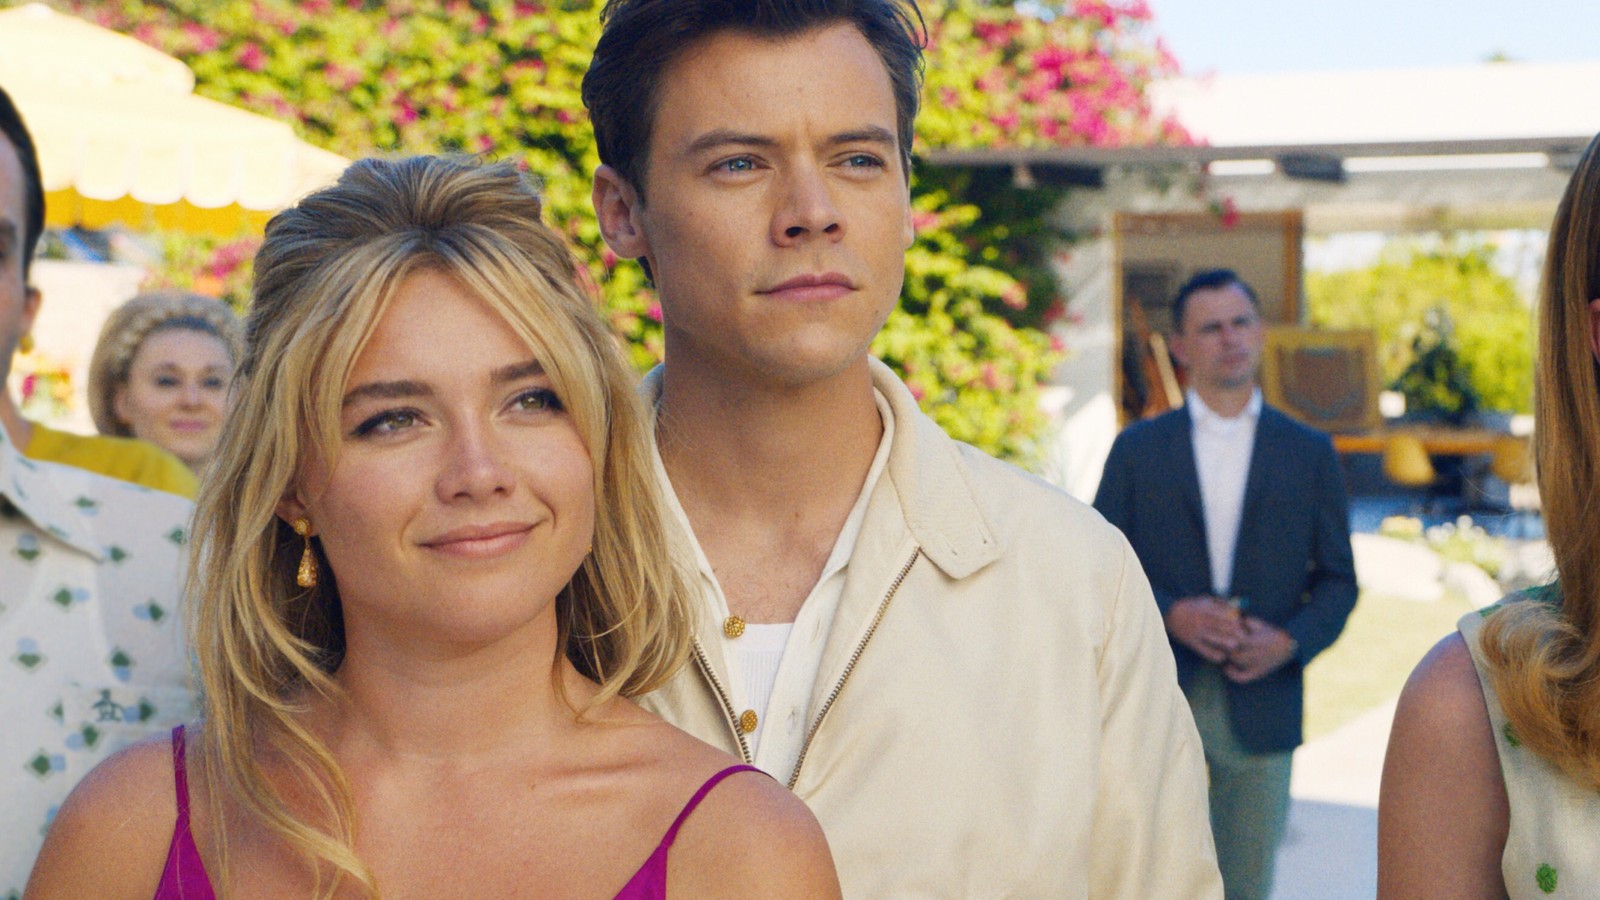 What Is Harry Styles Doing in 'Don't Worry Darling'?